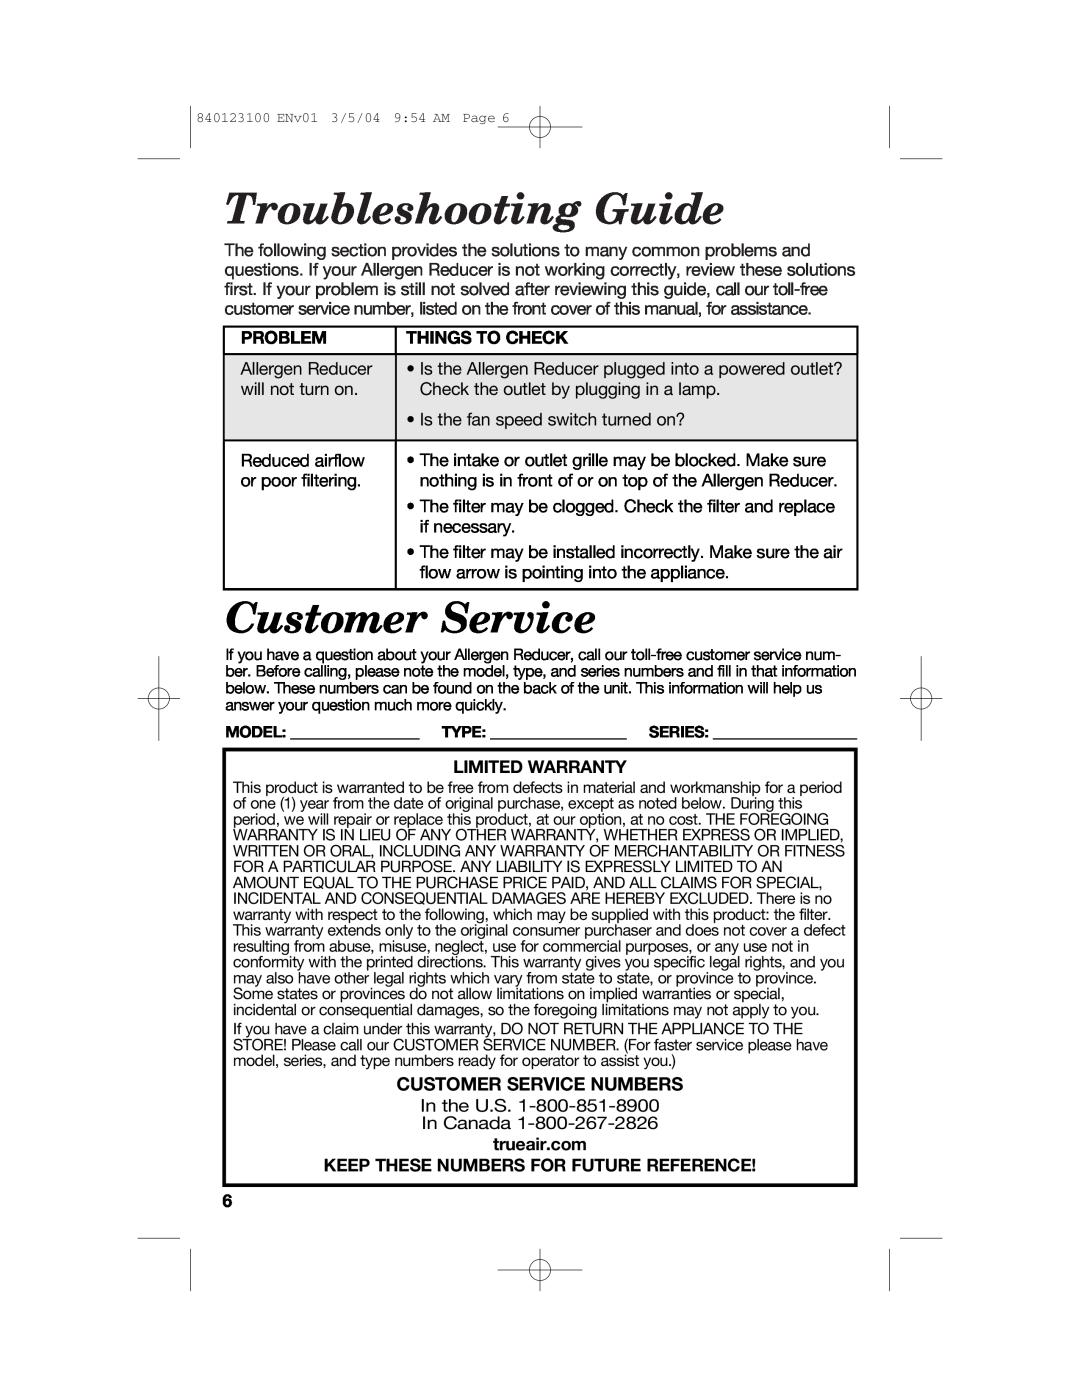 Hamilton Beach 840123100 Troubleshooting Guide, Customer Service Numbers, Problem, Things To Check, Limited Warranty 